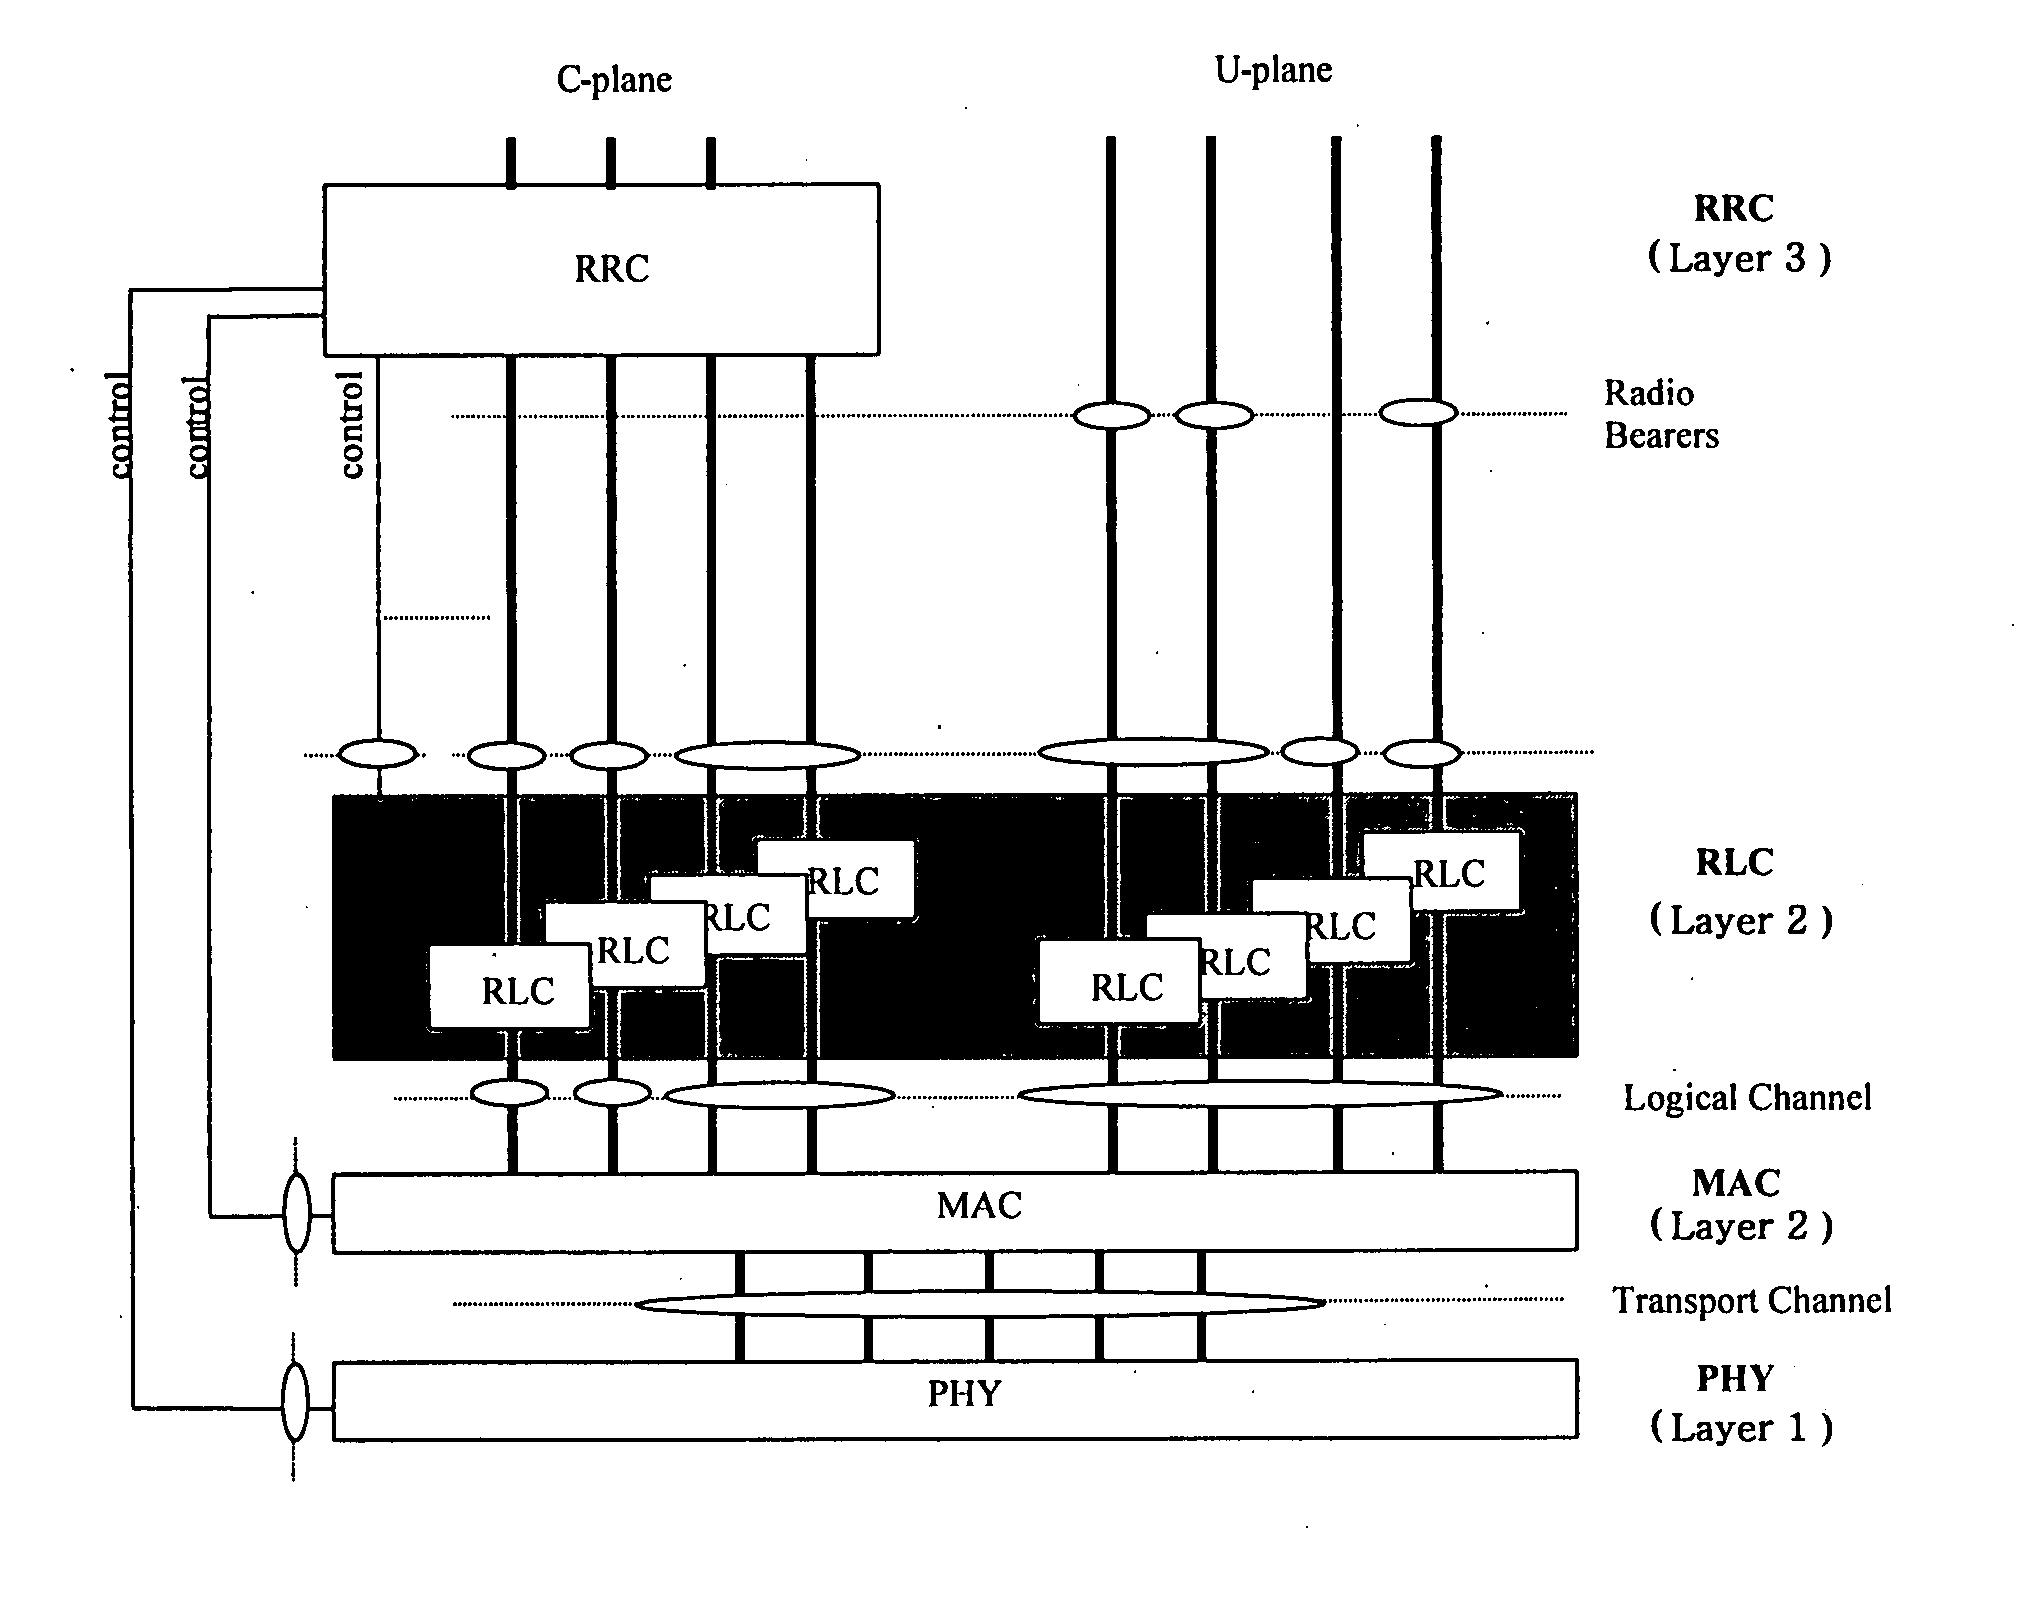 Paging technique to support point-to-multipoint (p-t-m) data transmissions